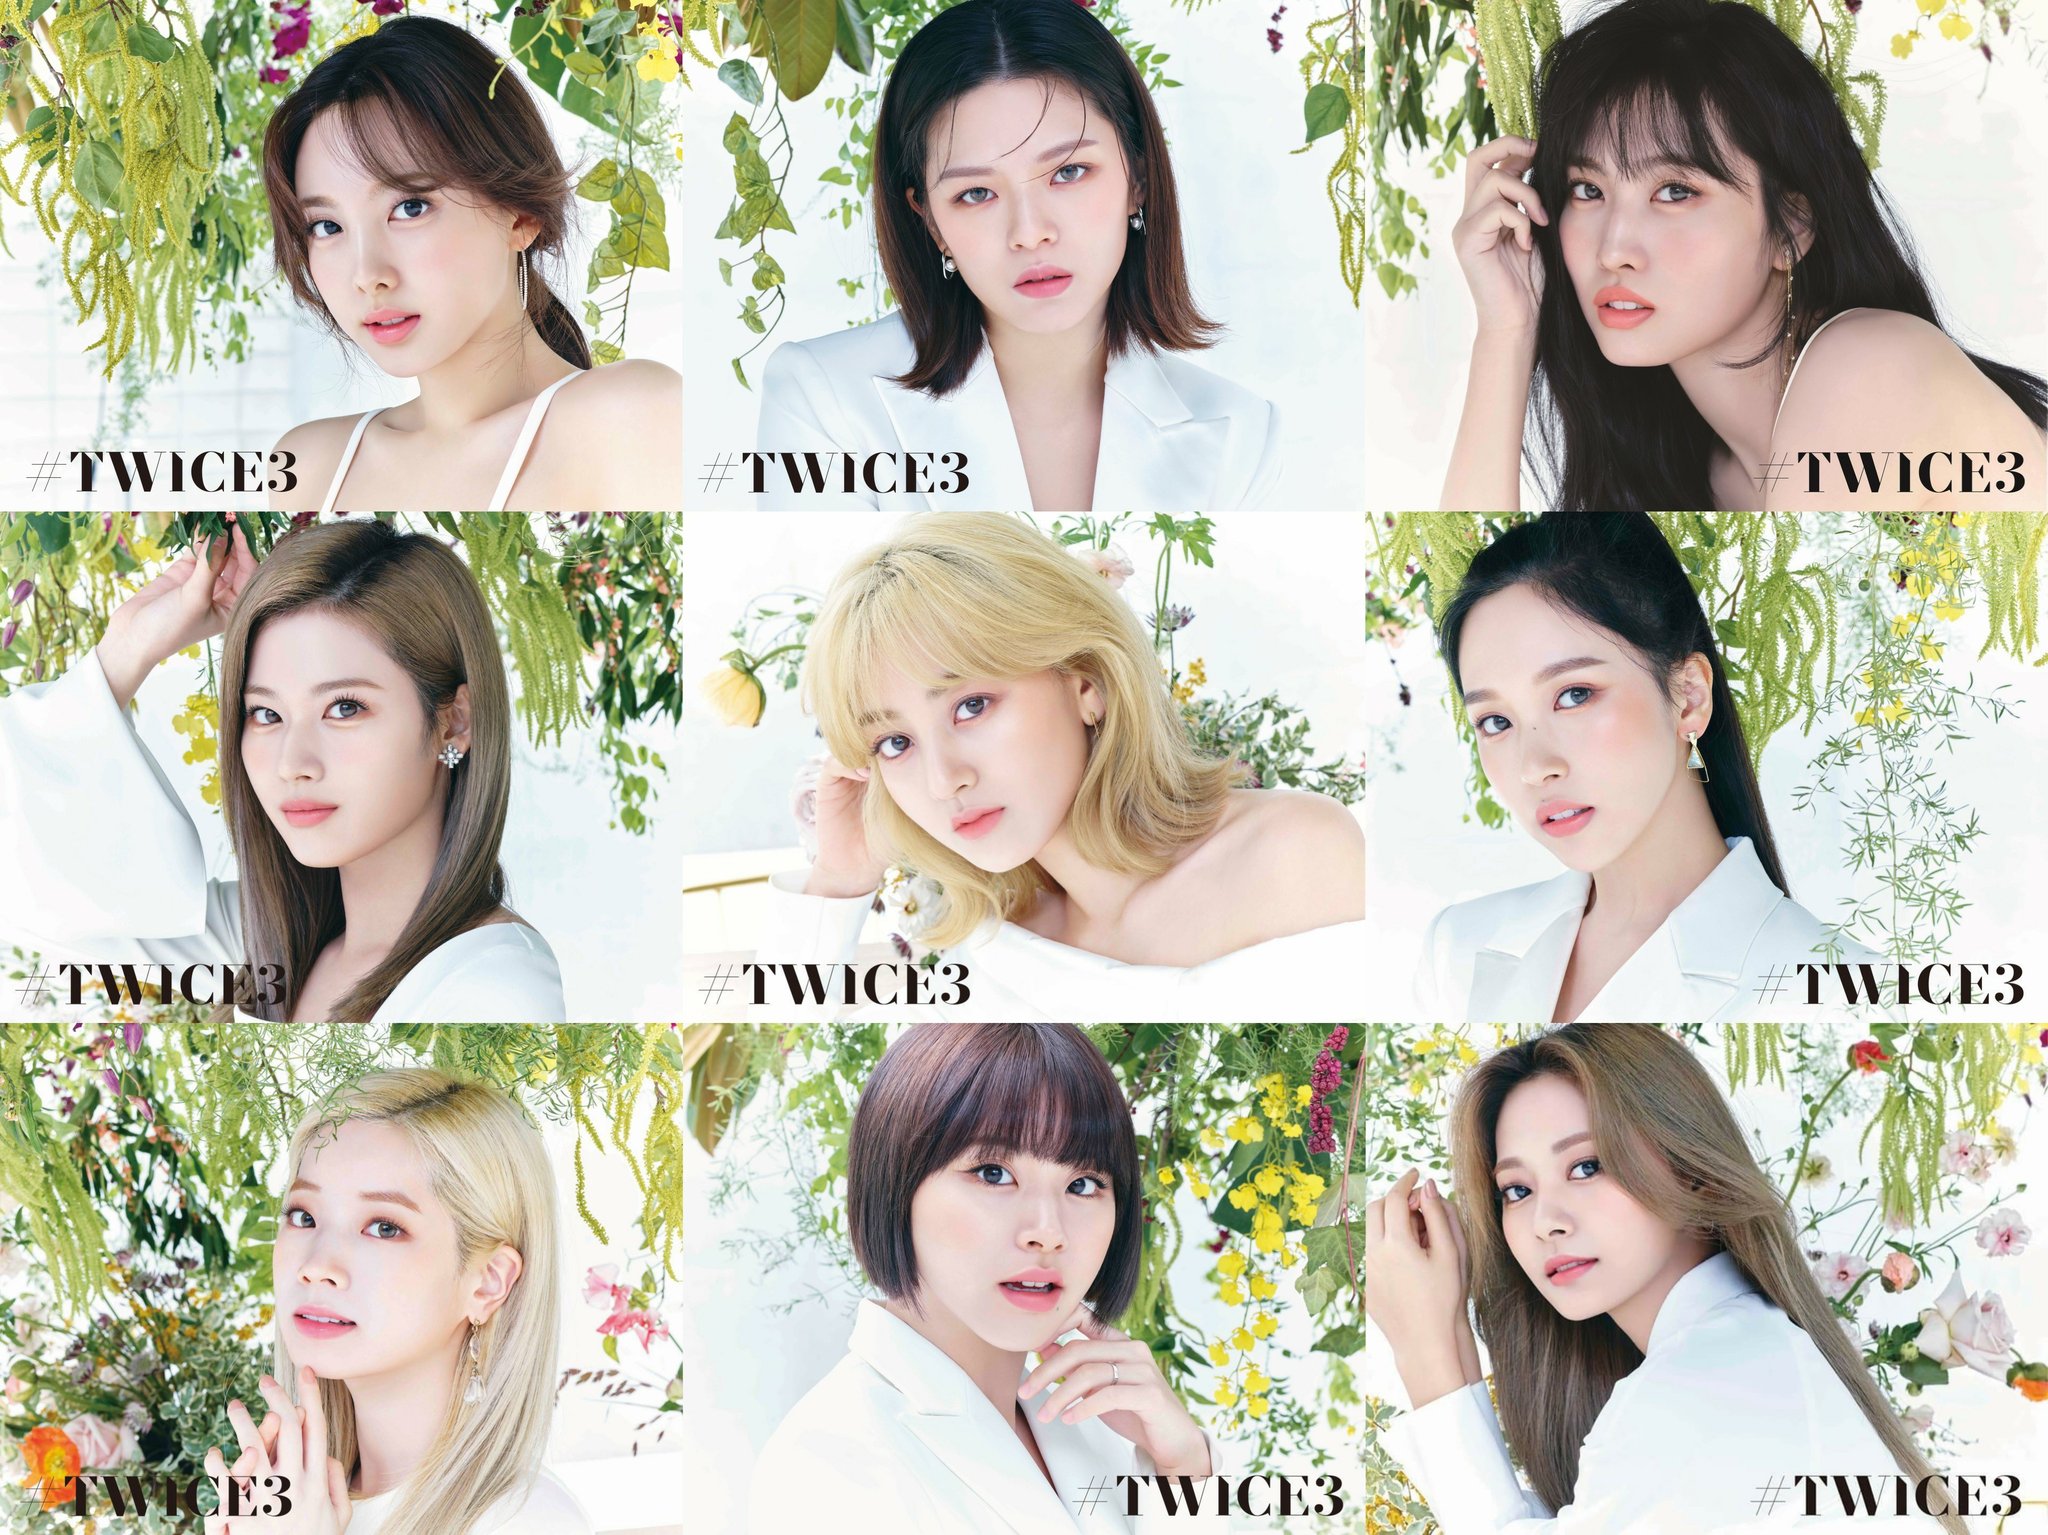 SK on X: All TWICE members with Seize The Light banner (in age order) 😊  #TWICE #트와이스 #SeizetheLight @JYPETWICE  / X